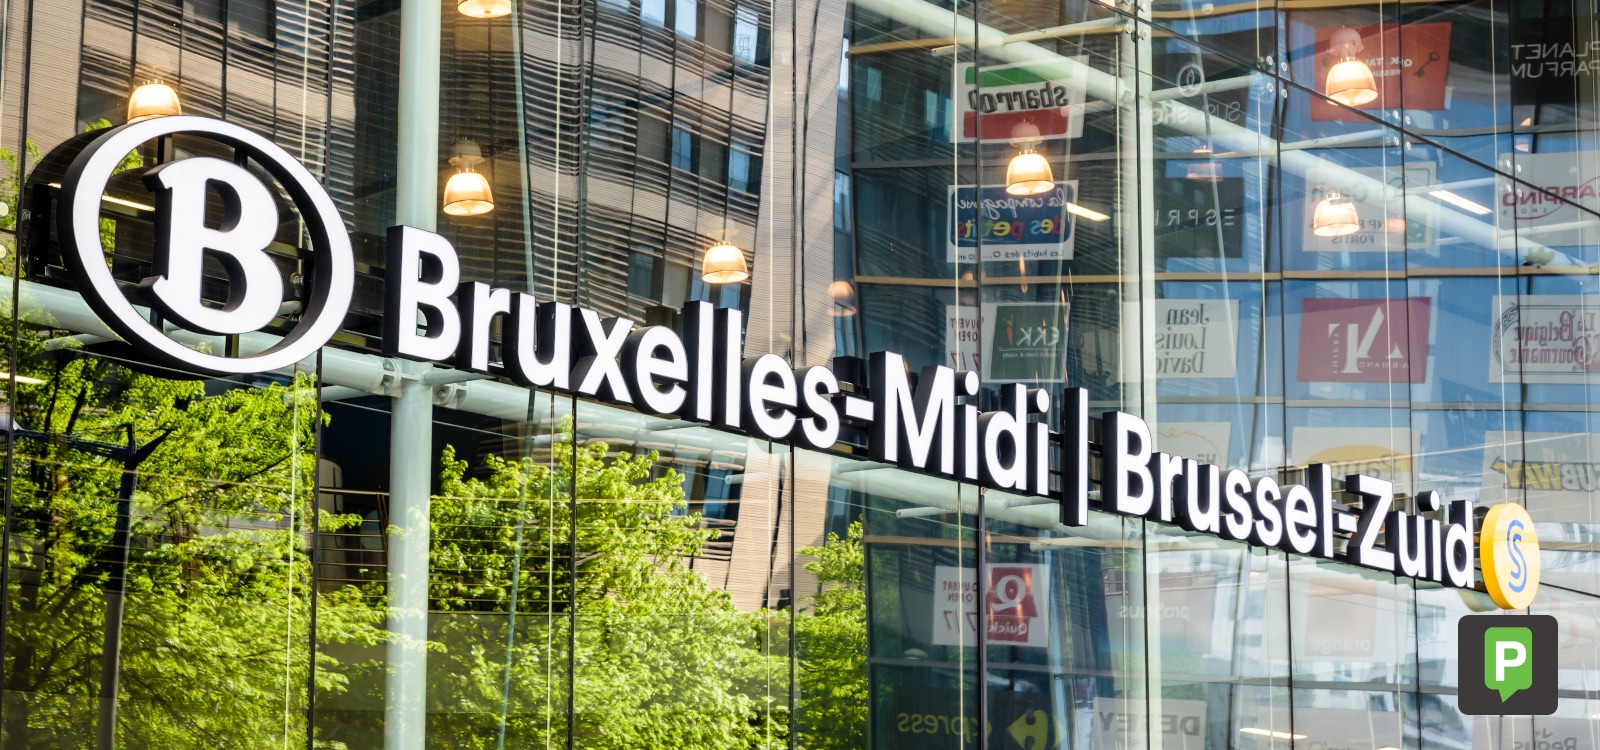 How to get to the Brussels Midi Station by car?